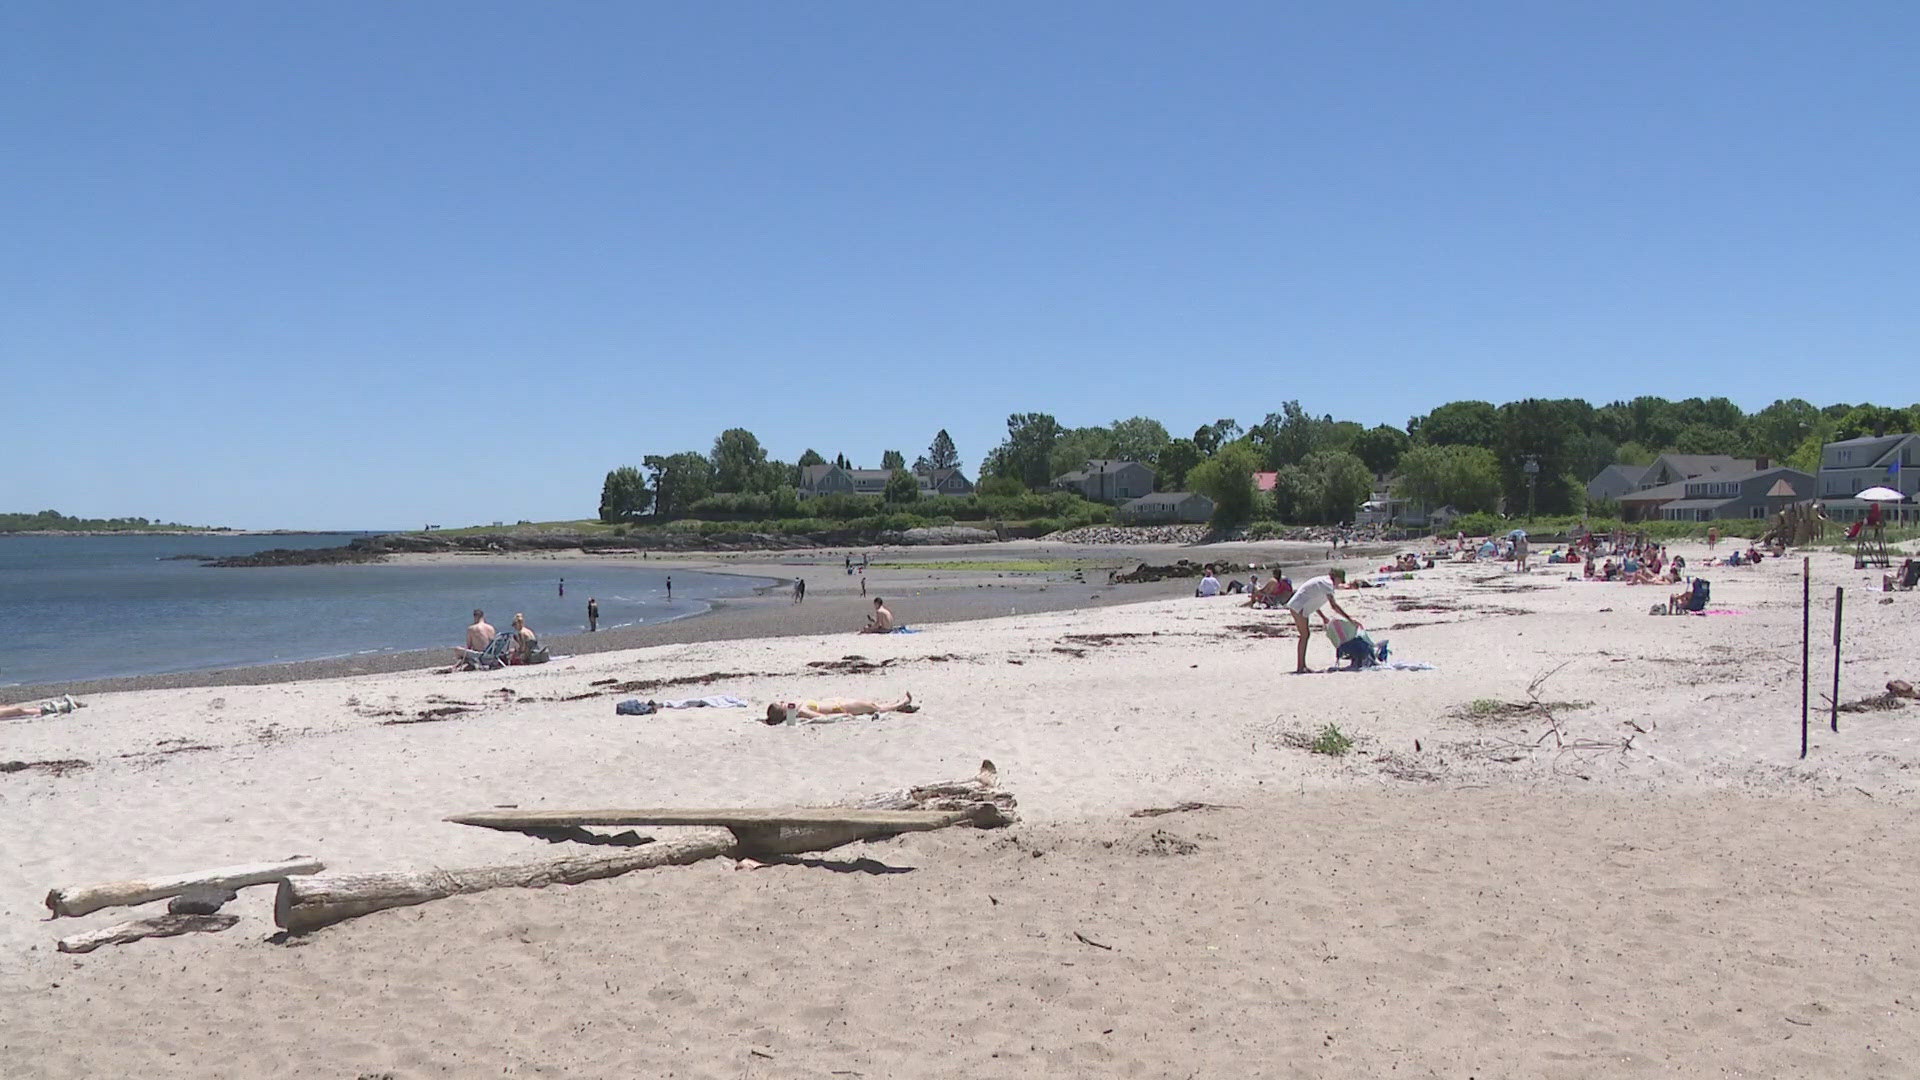 The Maine Department of Environmental Protection is warning people about unsafe bacteria levels under the waves. Here's what you need to know.